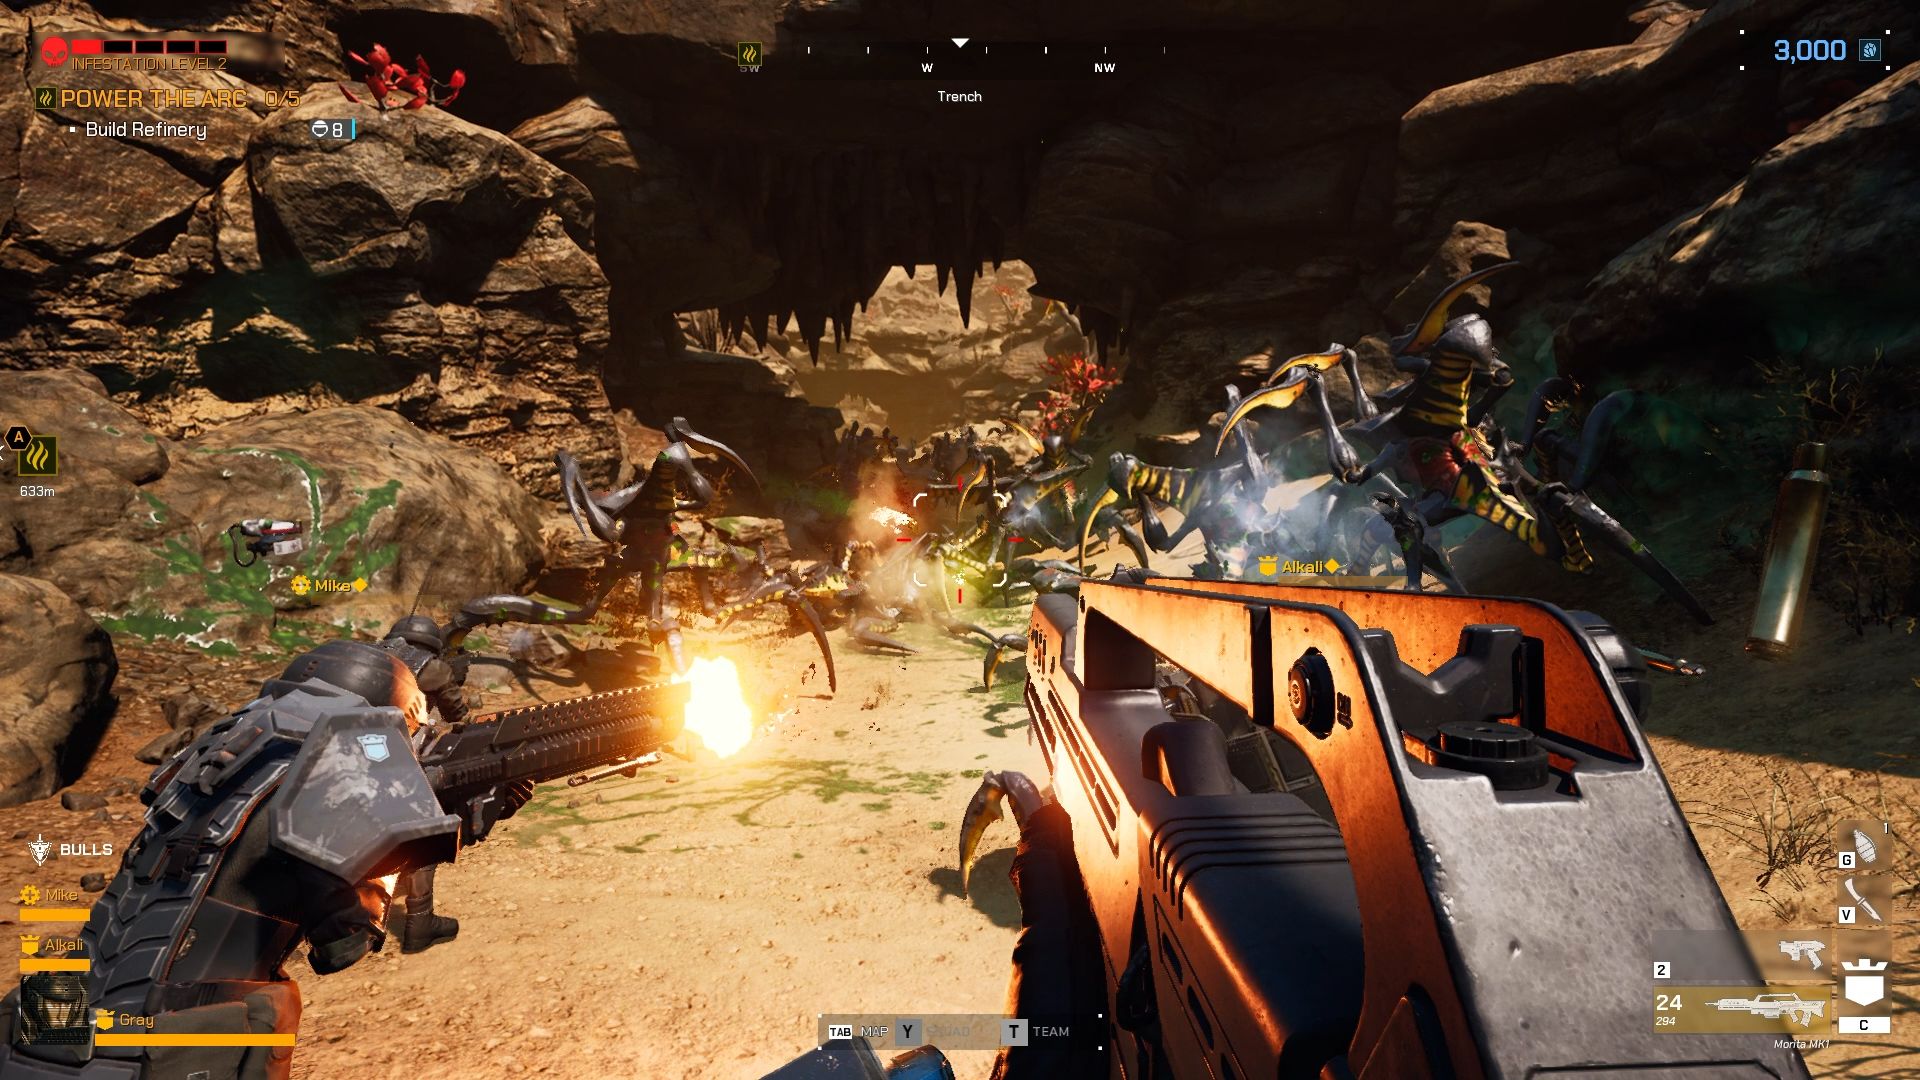 Starship Troopers: Extermination is a co-op bug shooter from Squad devs